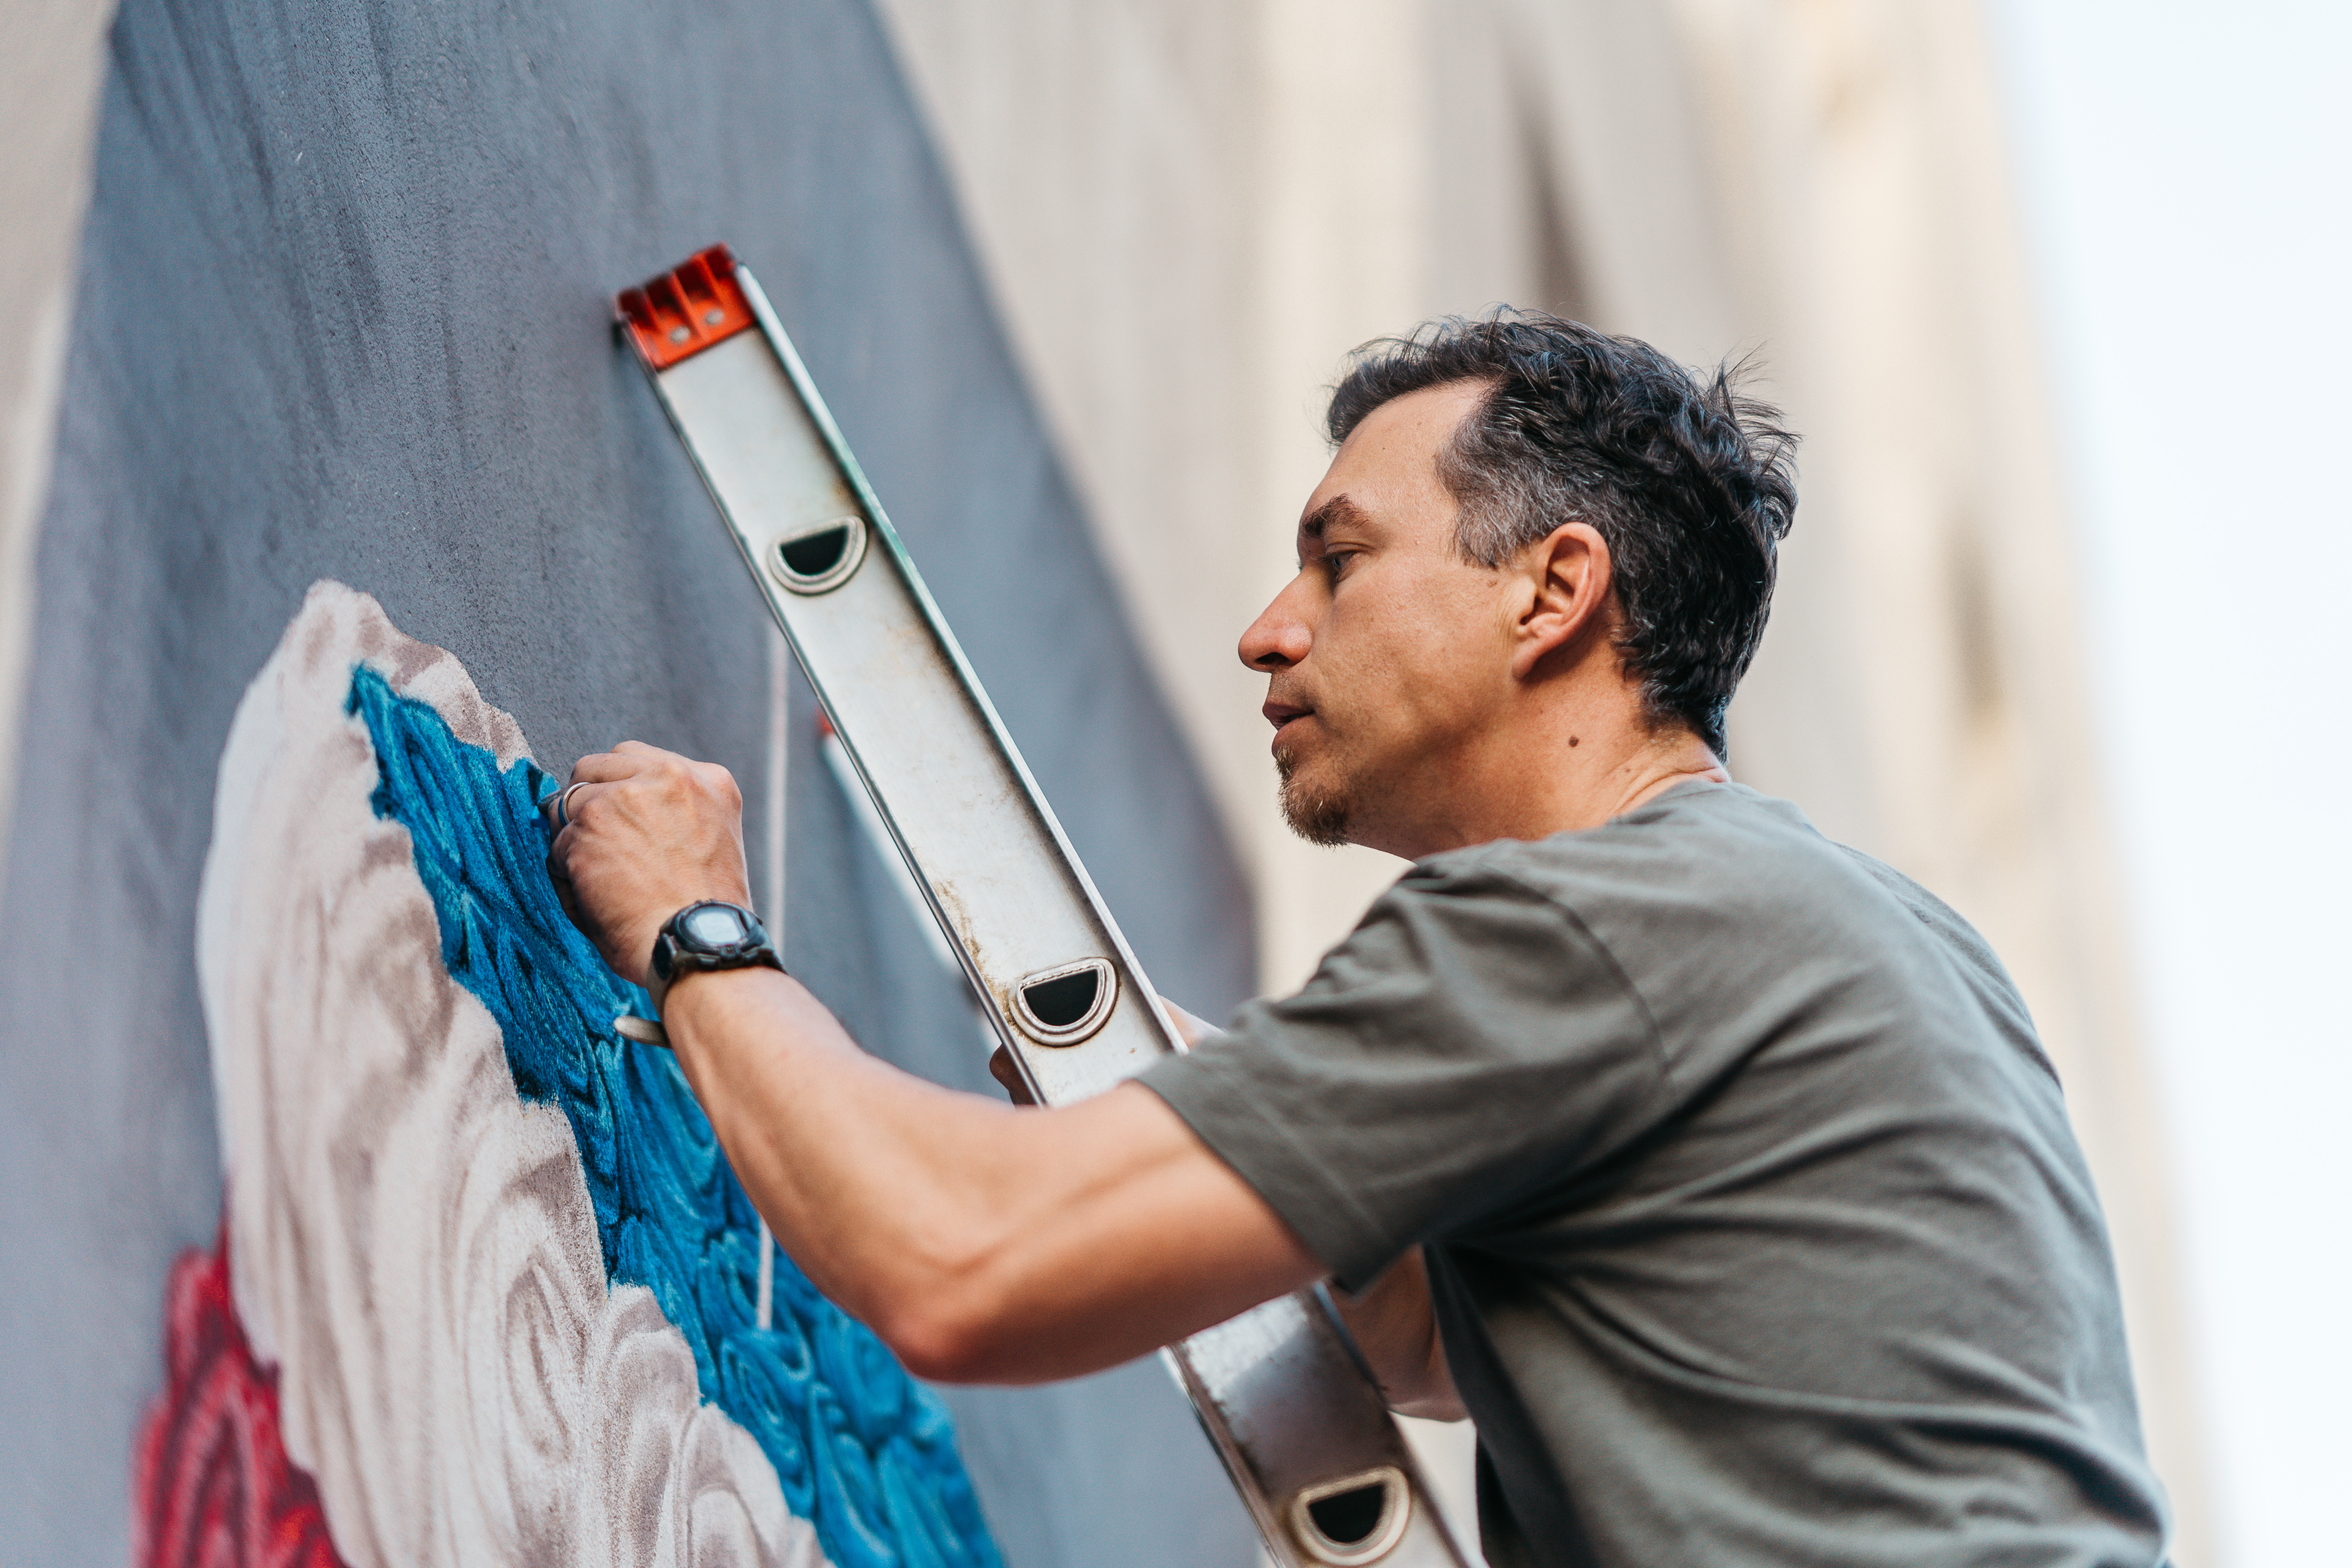 Artist Brad Settles creating a 2022 Chalk Waco mural in partnership with American Bank.